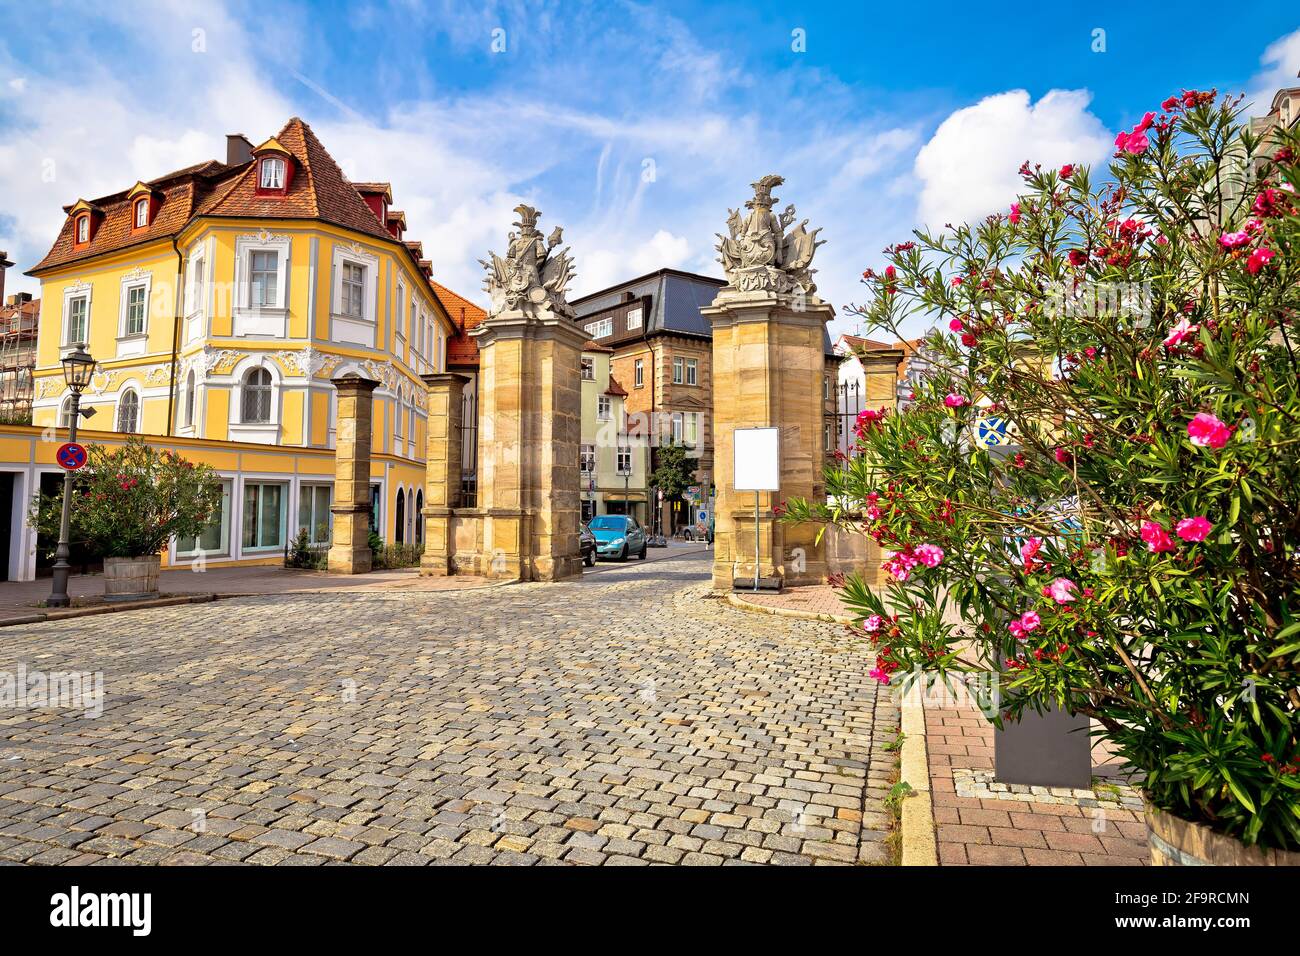 Ansbach. Old town of Ansbach picturesque street and town gate view, Bavaria region of Germany Stock Photo